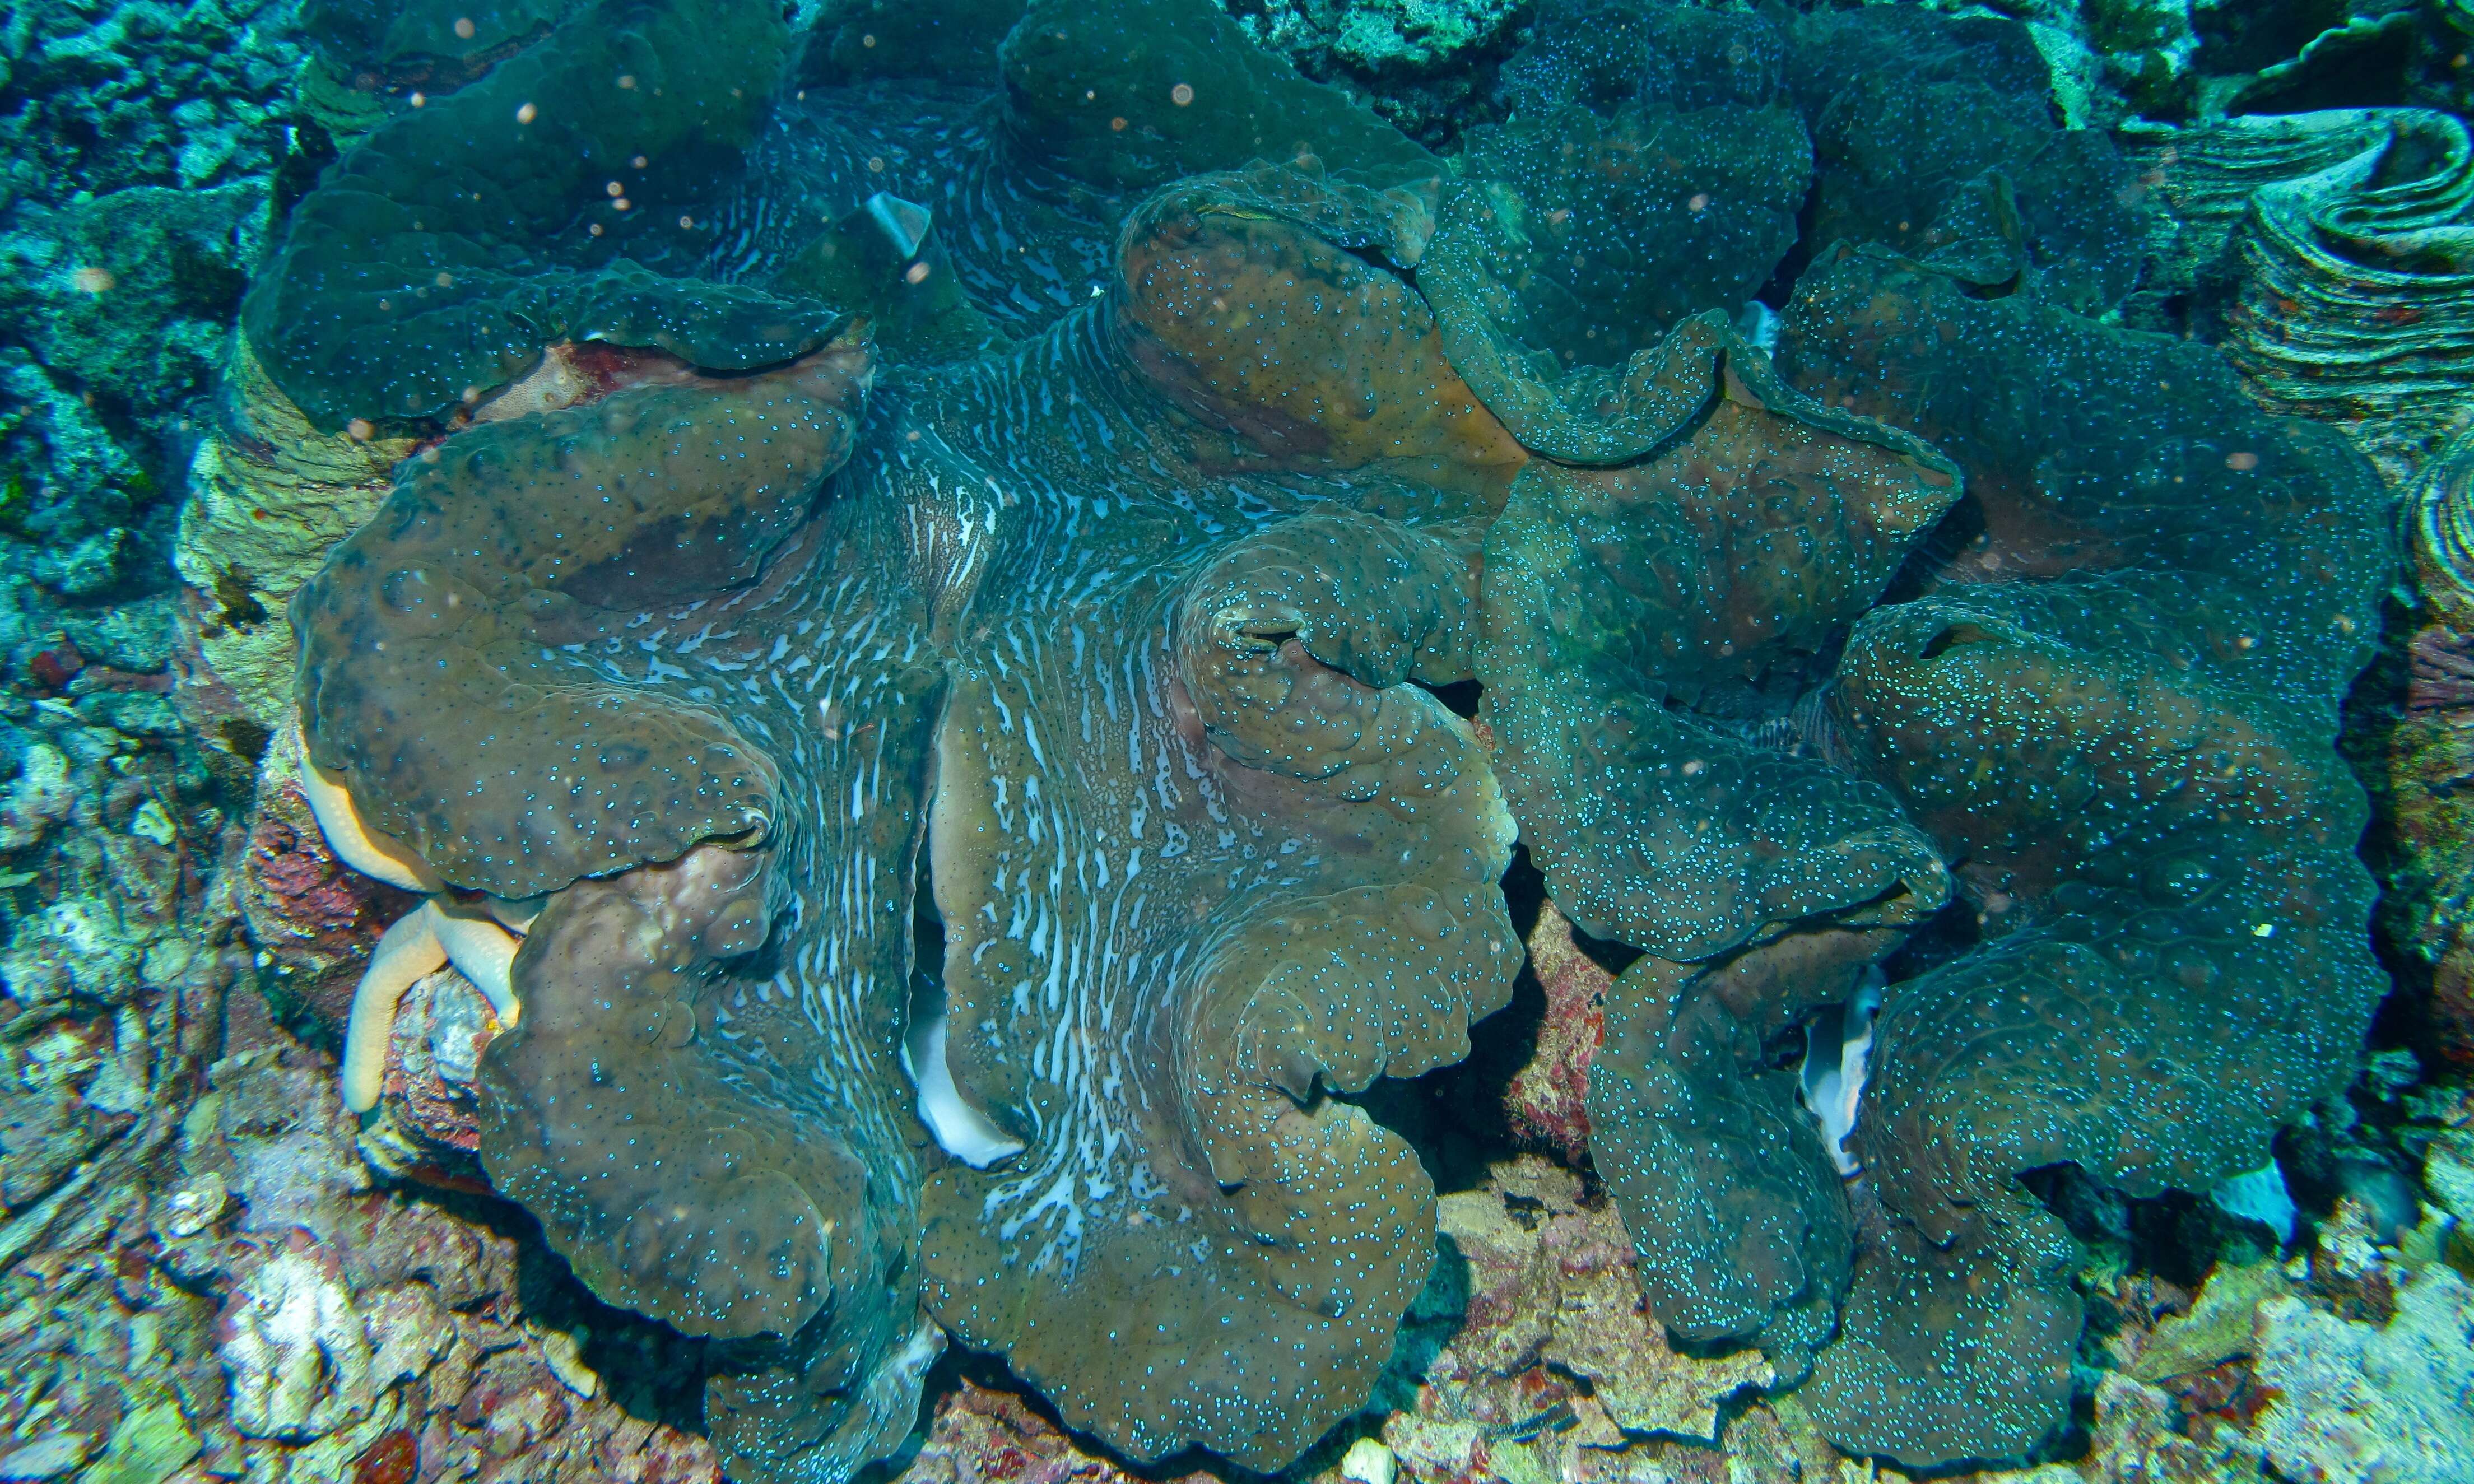 Image of Giant Clam